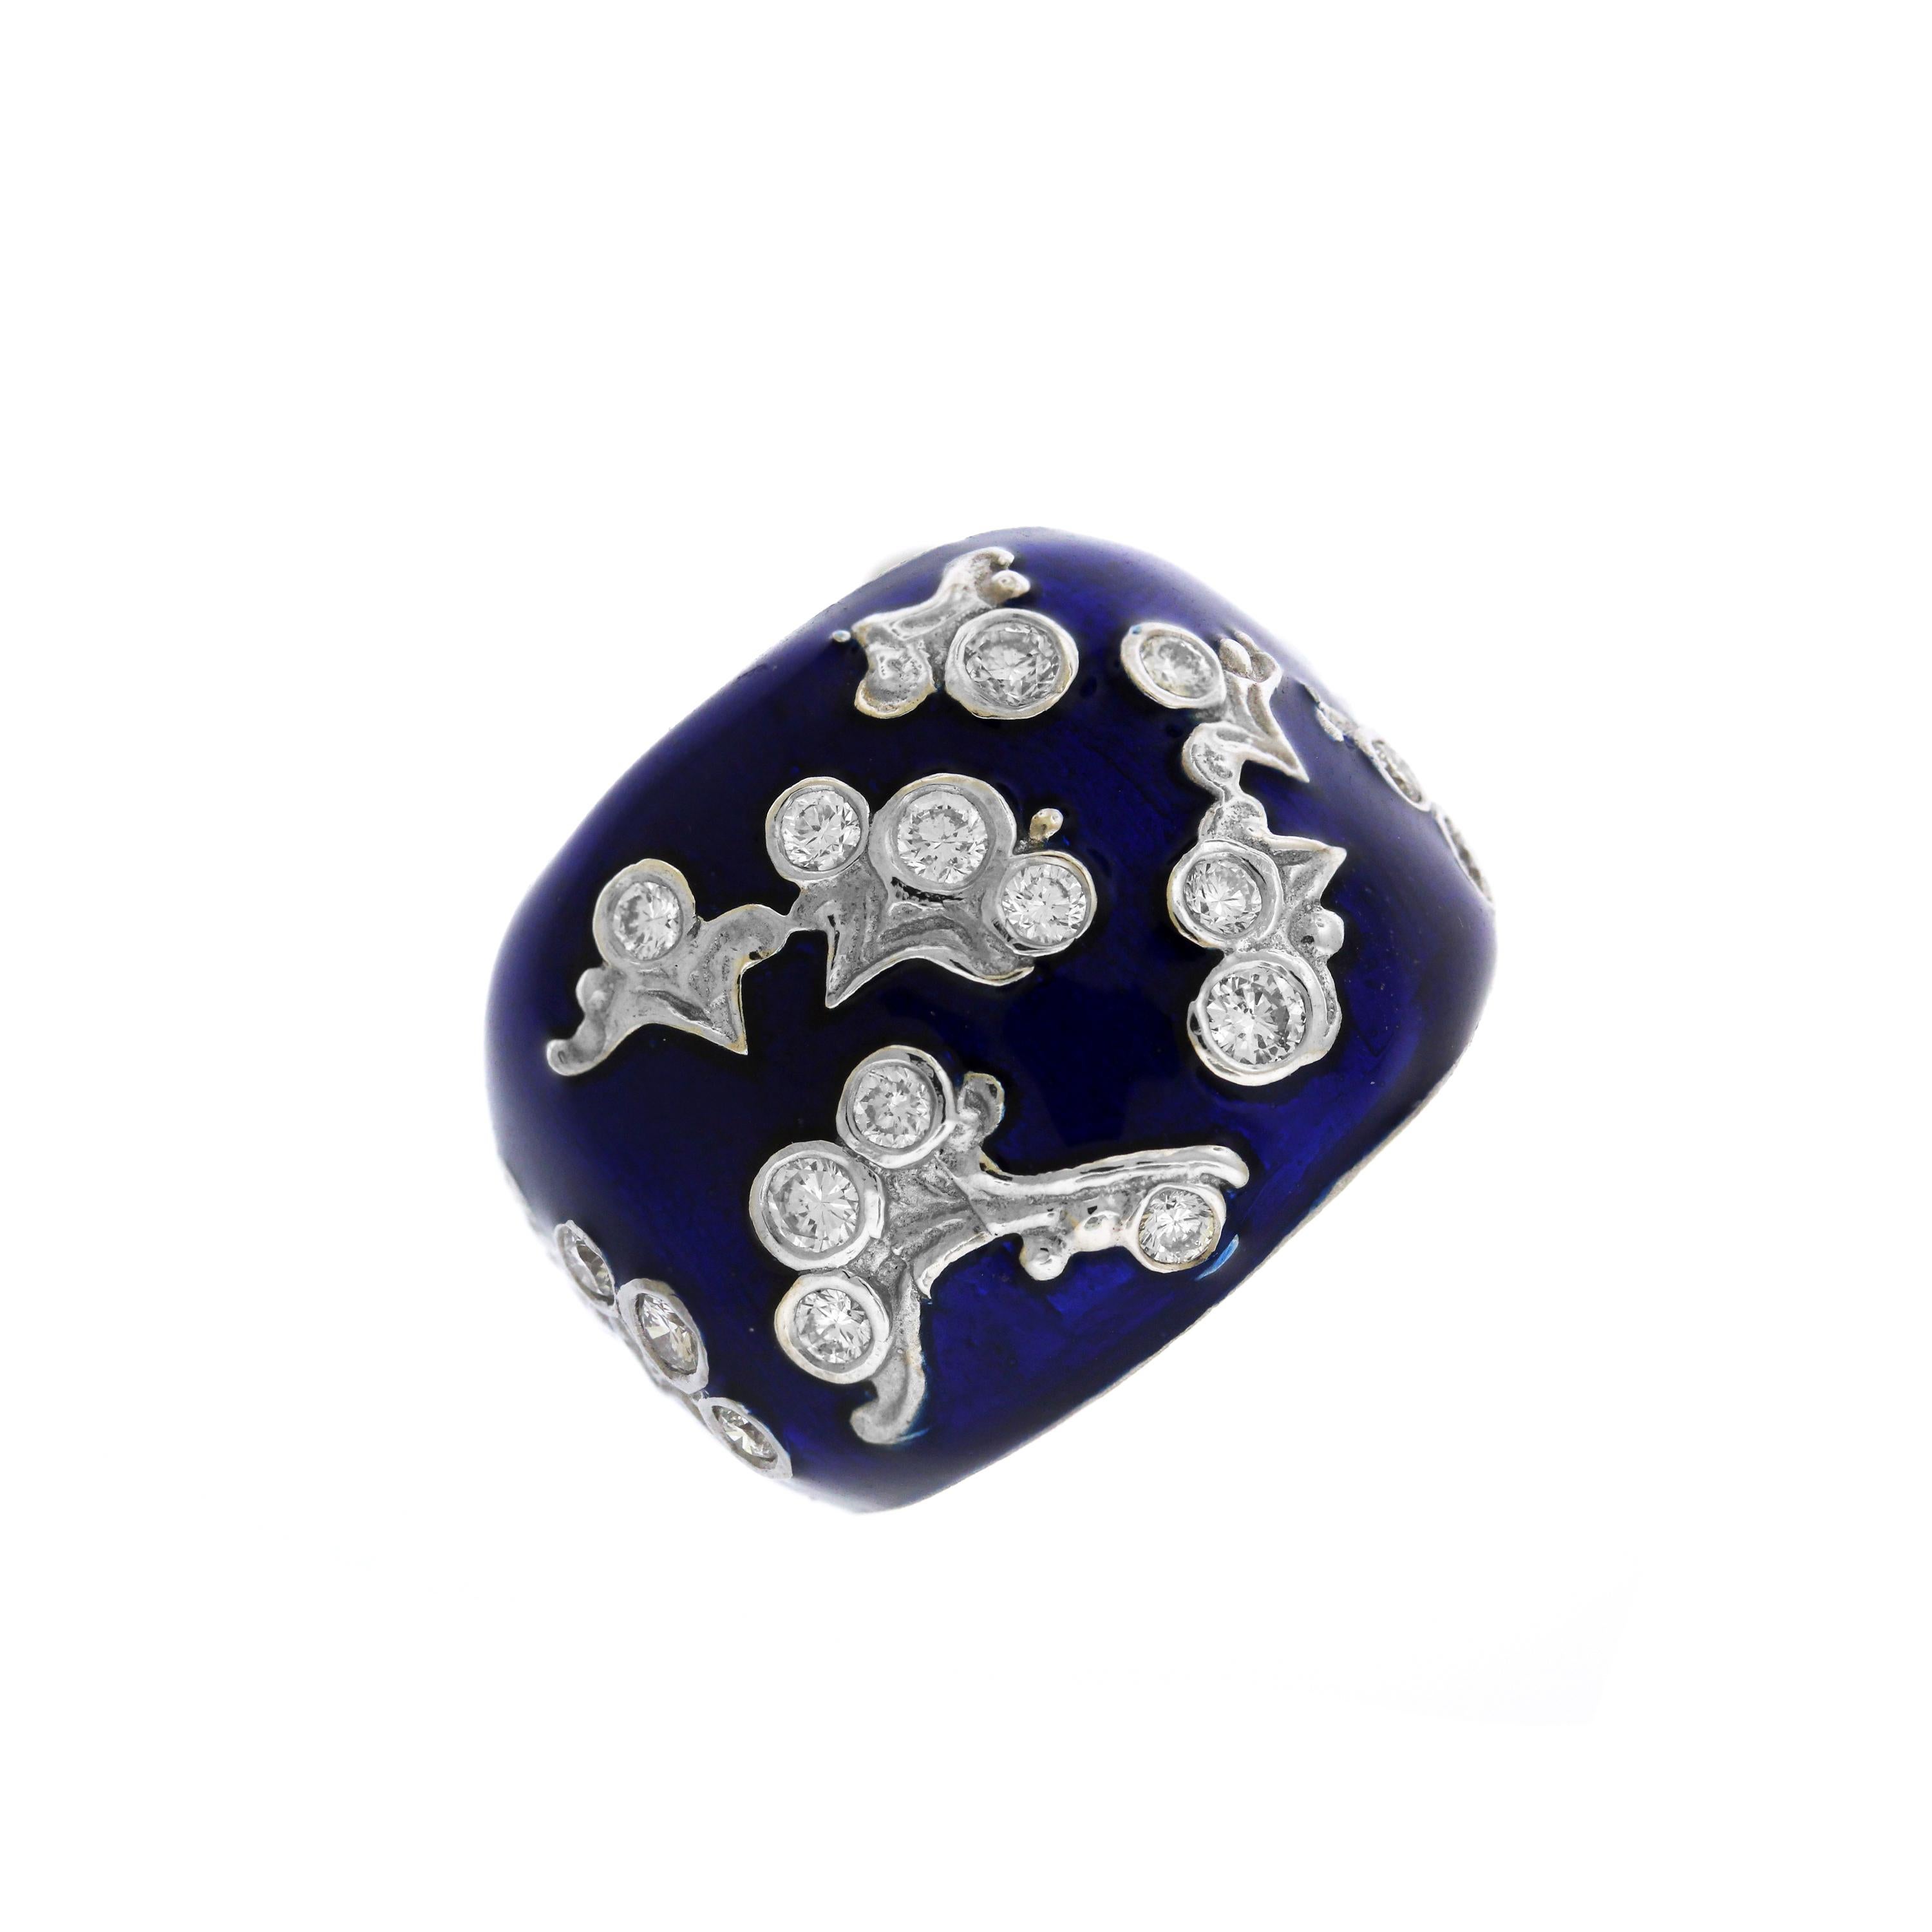 Stambolian 18 Karat White Gold Diamond Cobalt Blue Enamel Floral Motif Ring

0.82 carat G color, VS clarity diamonds

Ring face is 0.8 in., 0.3 band width

Size 7, sizable. 

Ring is signed STAMBOLIAN and has the Trademark 